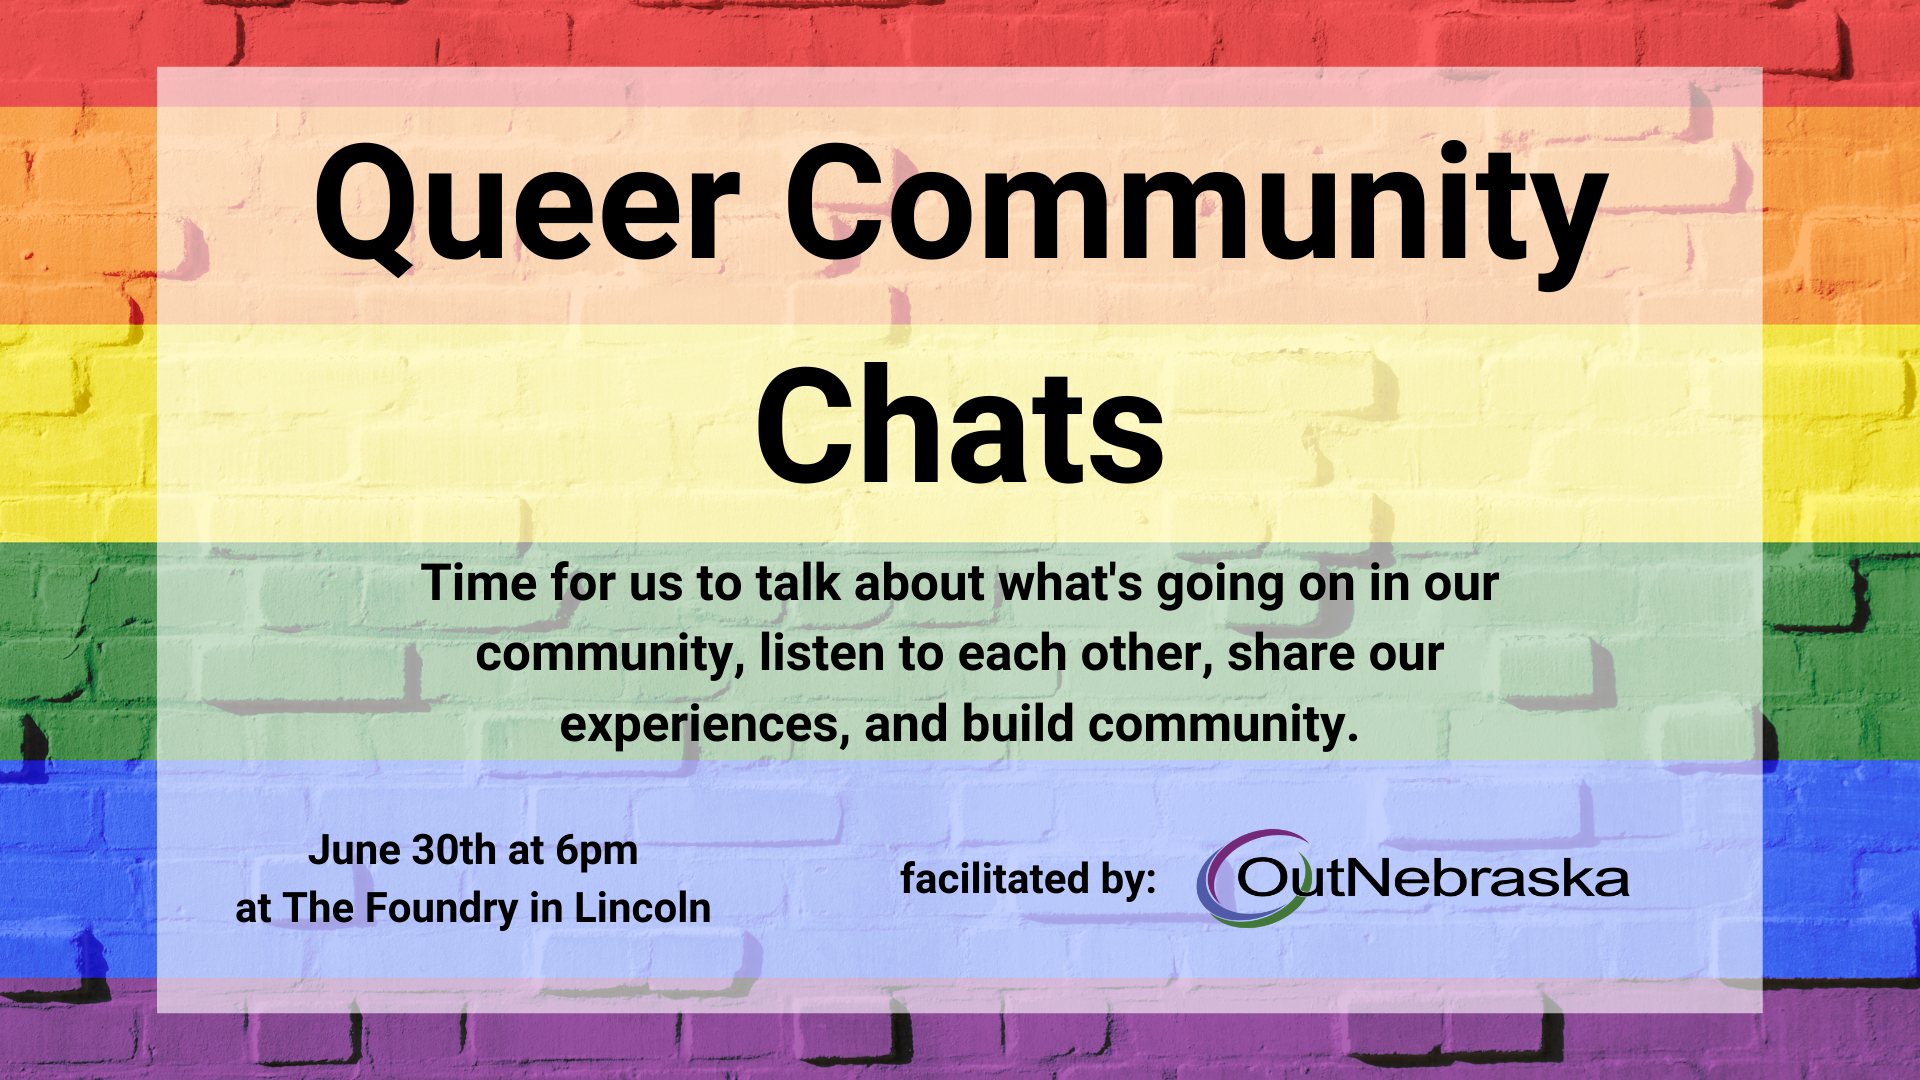 Rainbow brick background. Text over top: Queer Community Chats. Time for us to talk about what's going on in our community, listen to each other, share our experiences, and build community. June 30th at 6pm at The Foundry in Lincoln. Facilitated by OutNebraska.